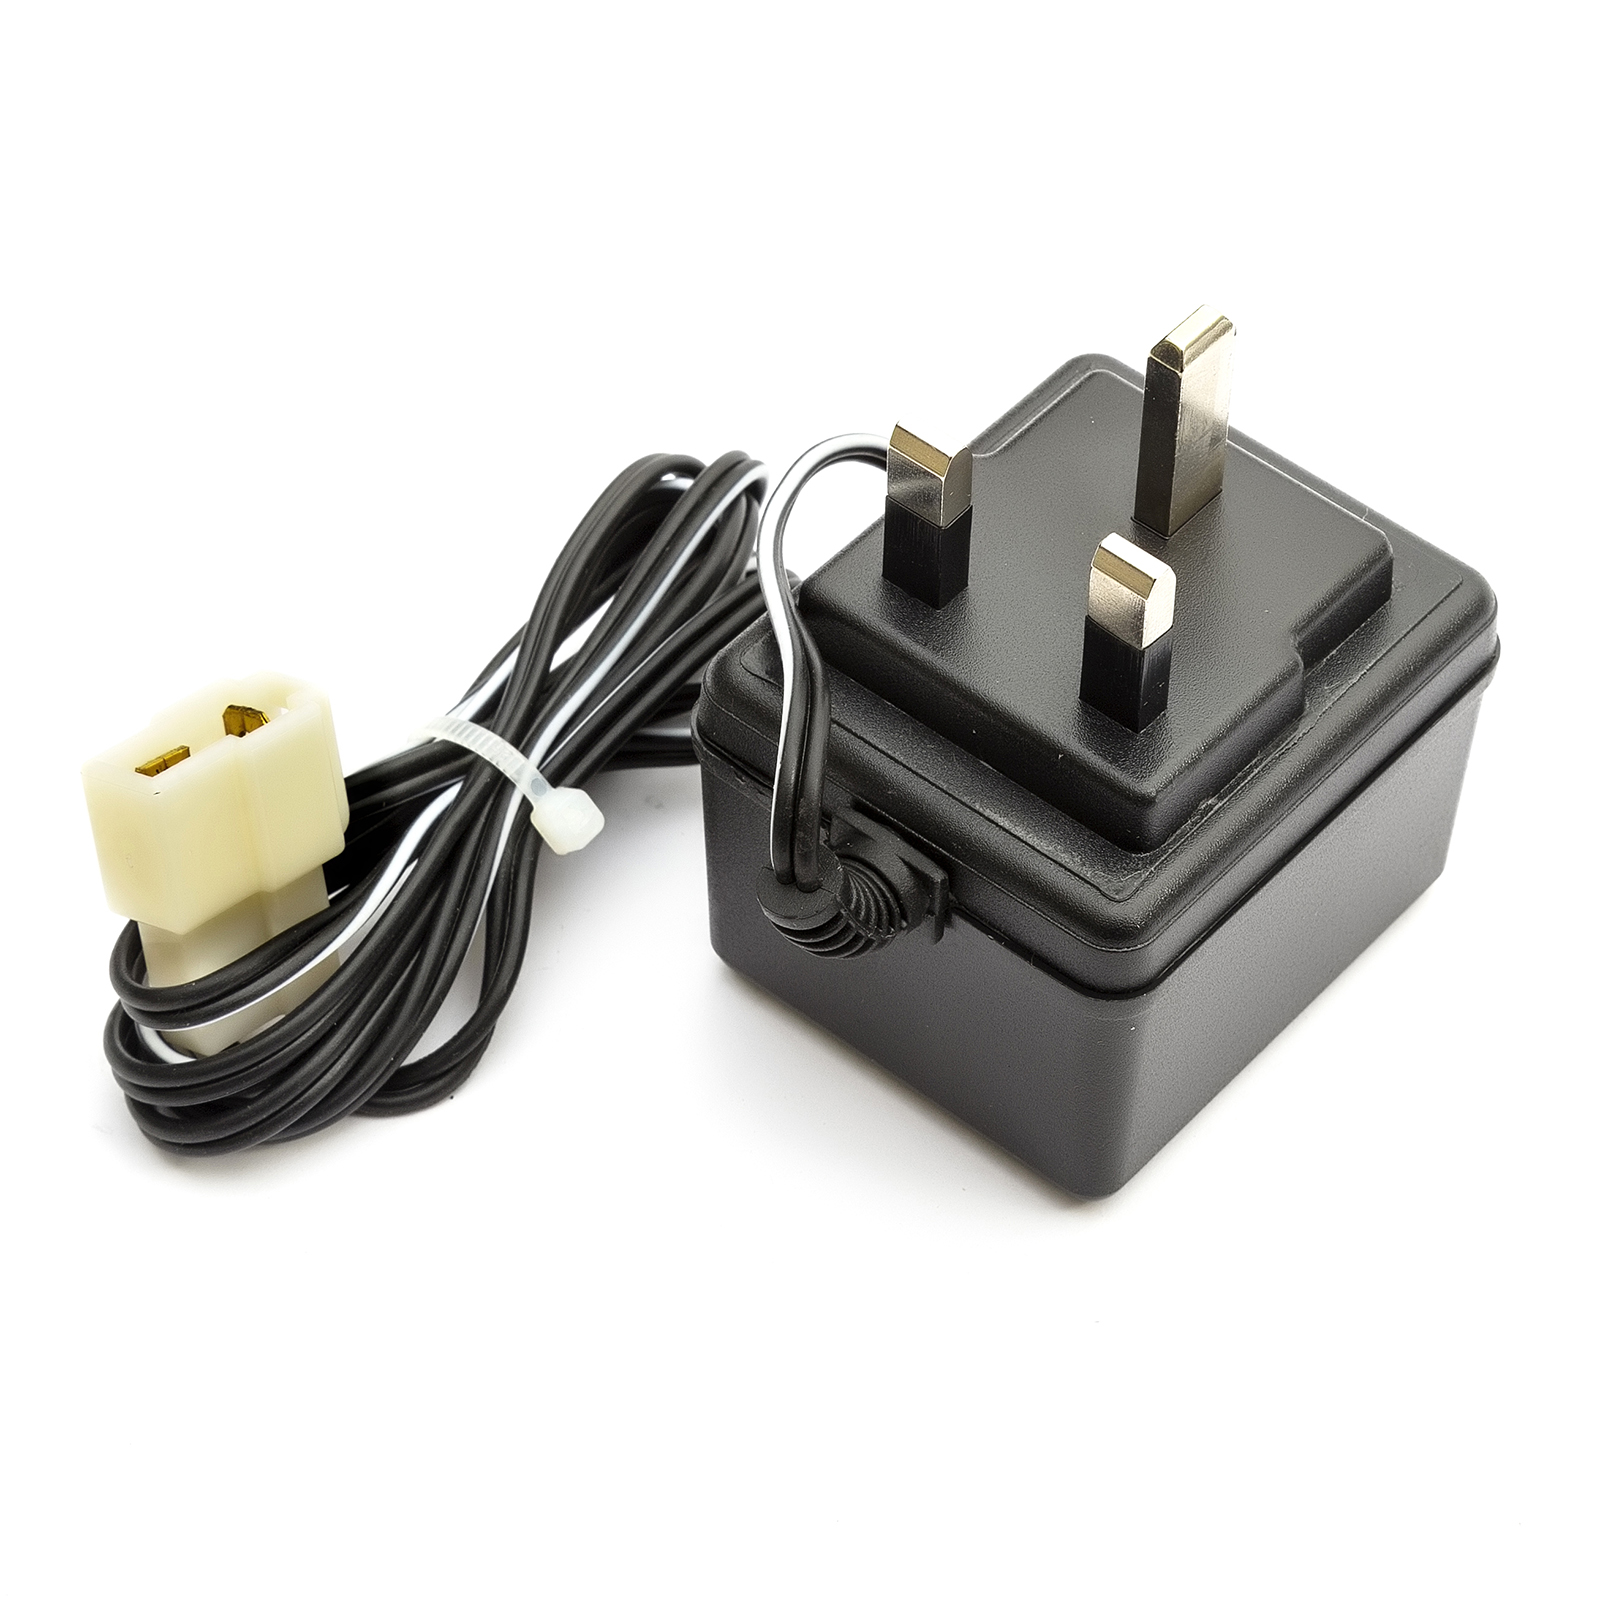 6 volt battery charger for roll play truck